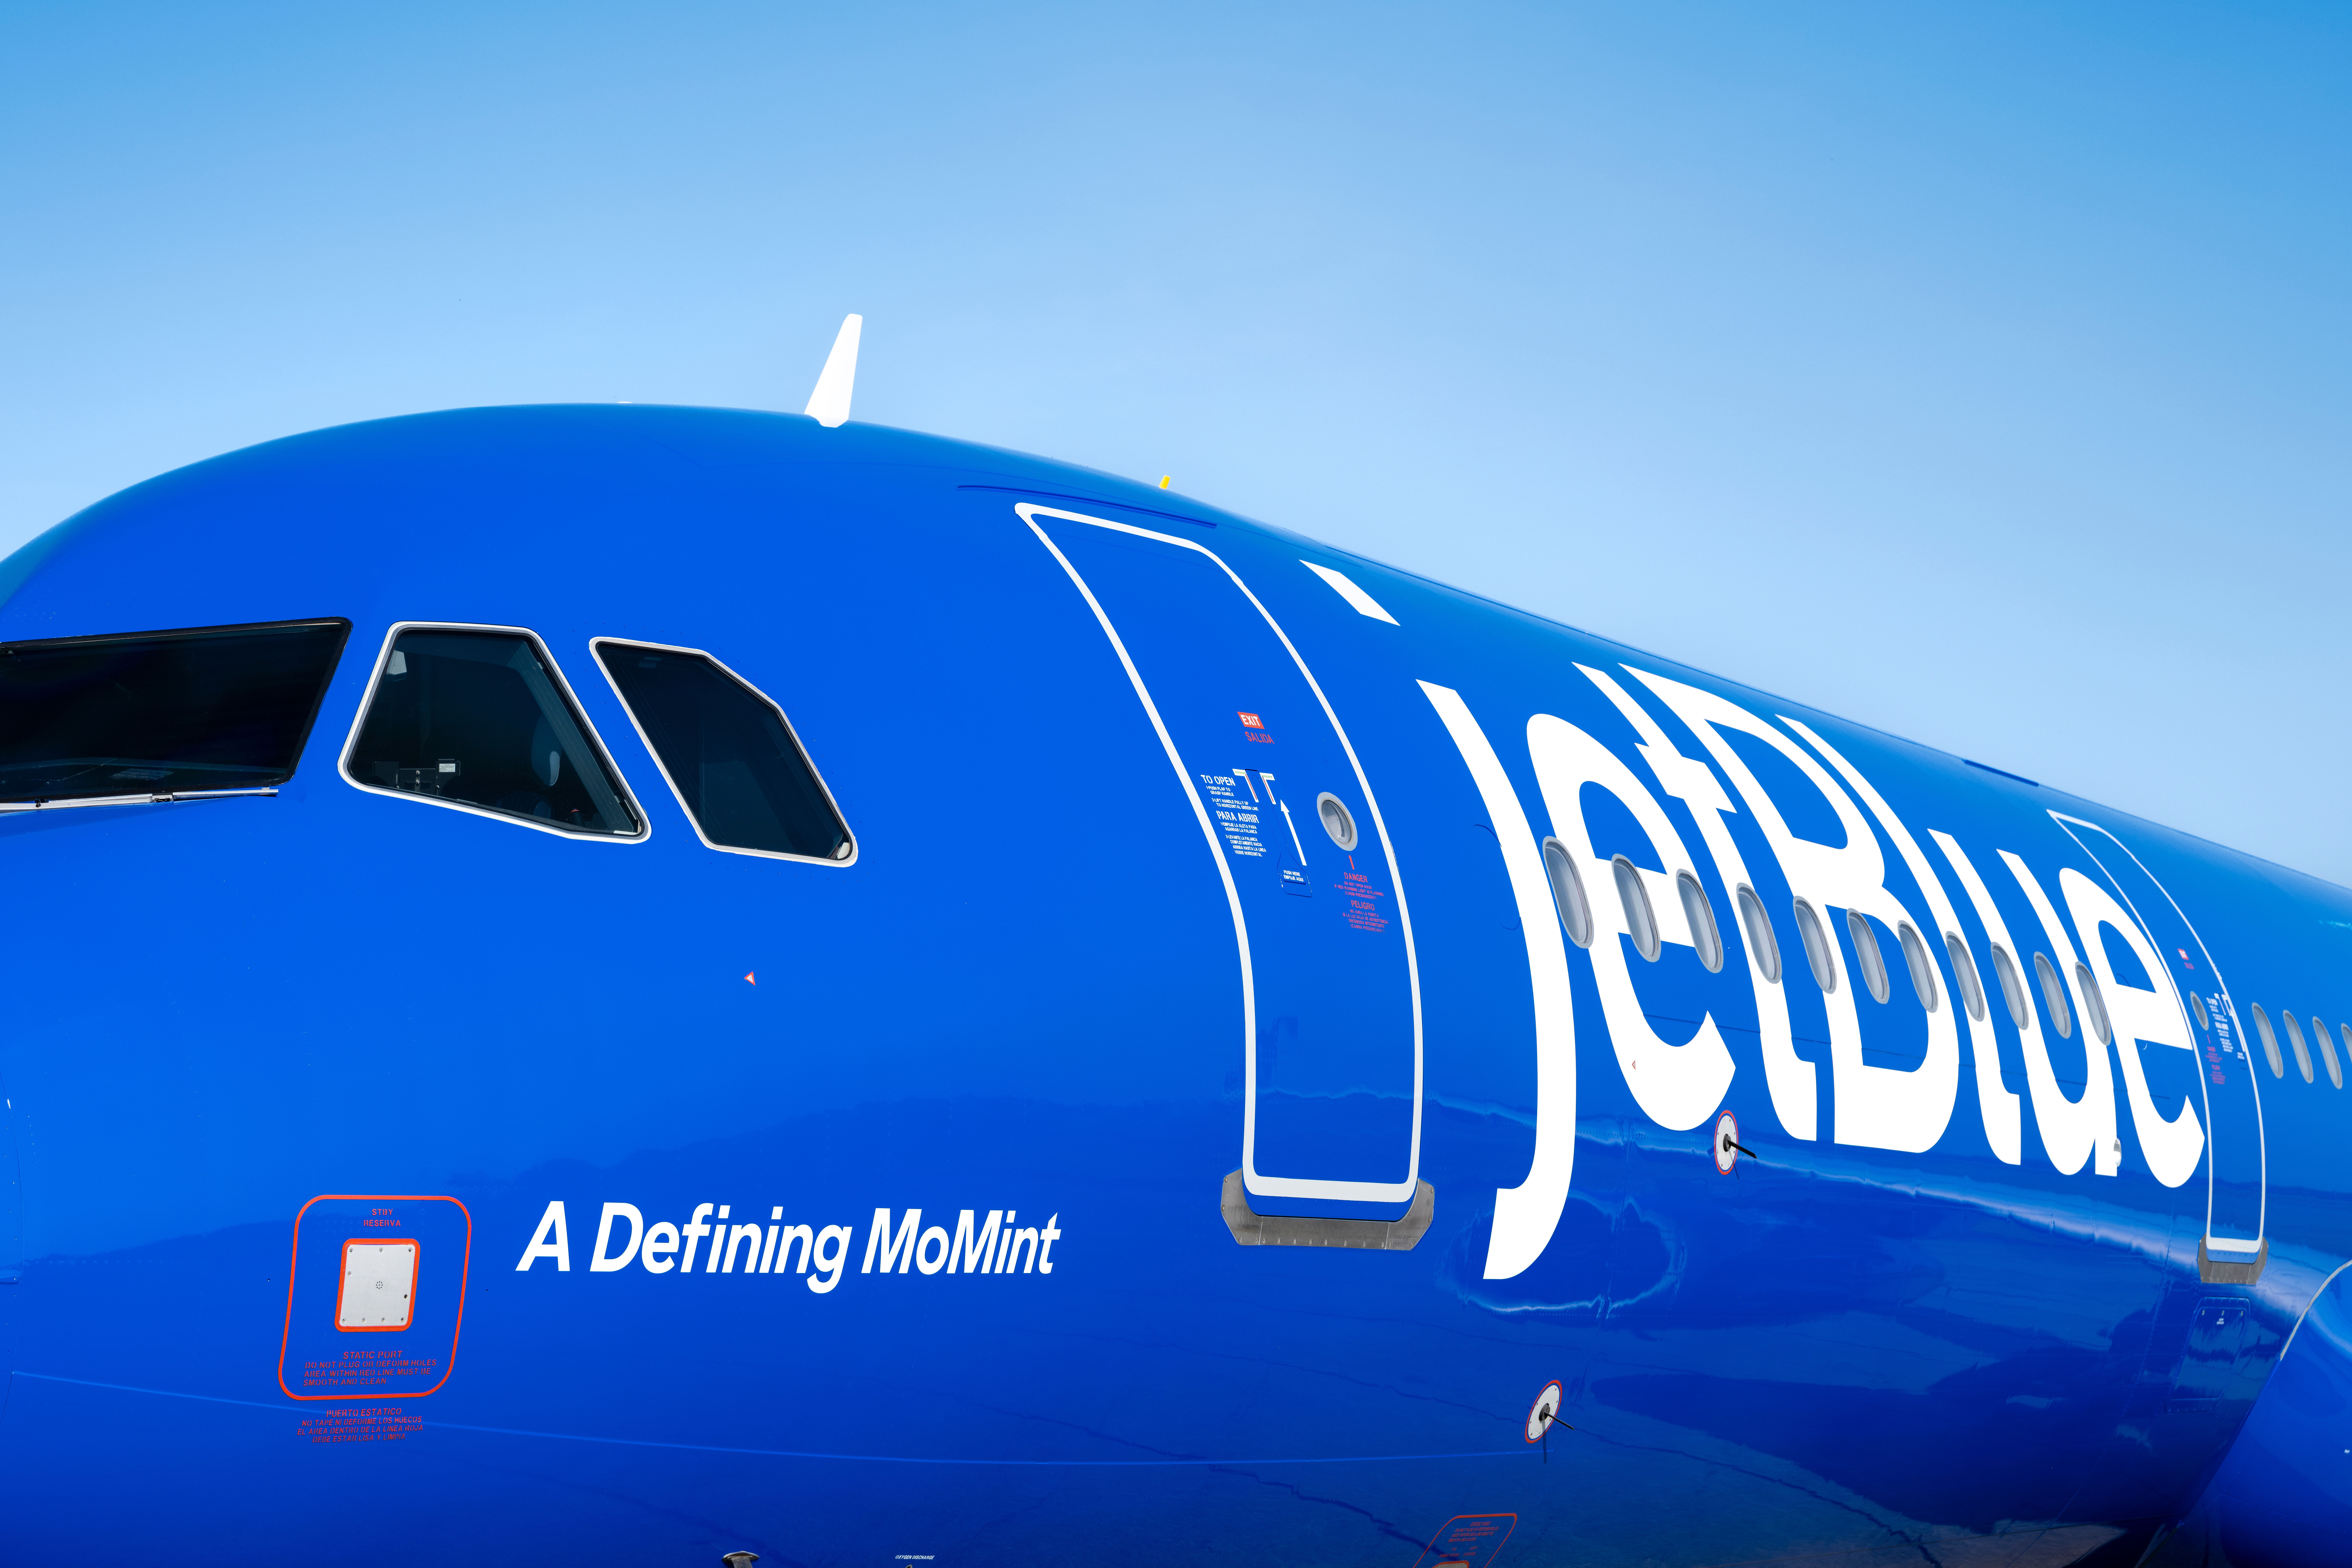 JetBlue Airbus A321 A Defining MoMint